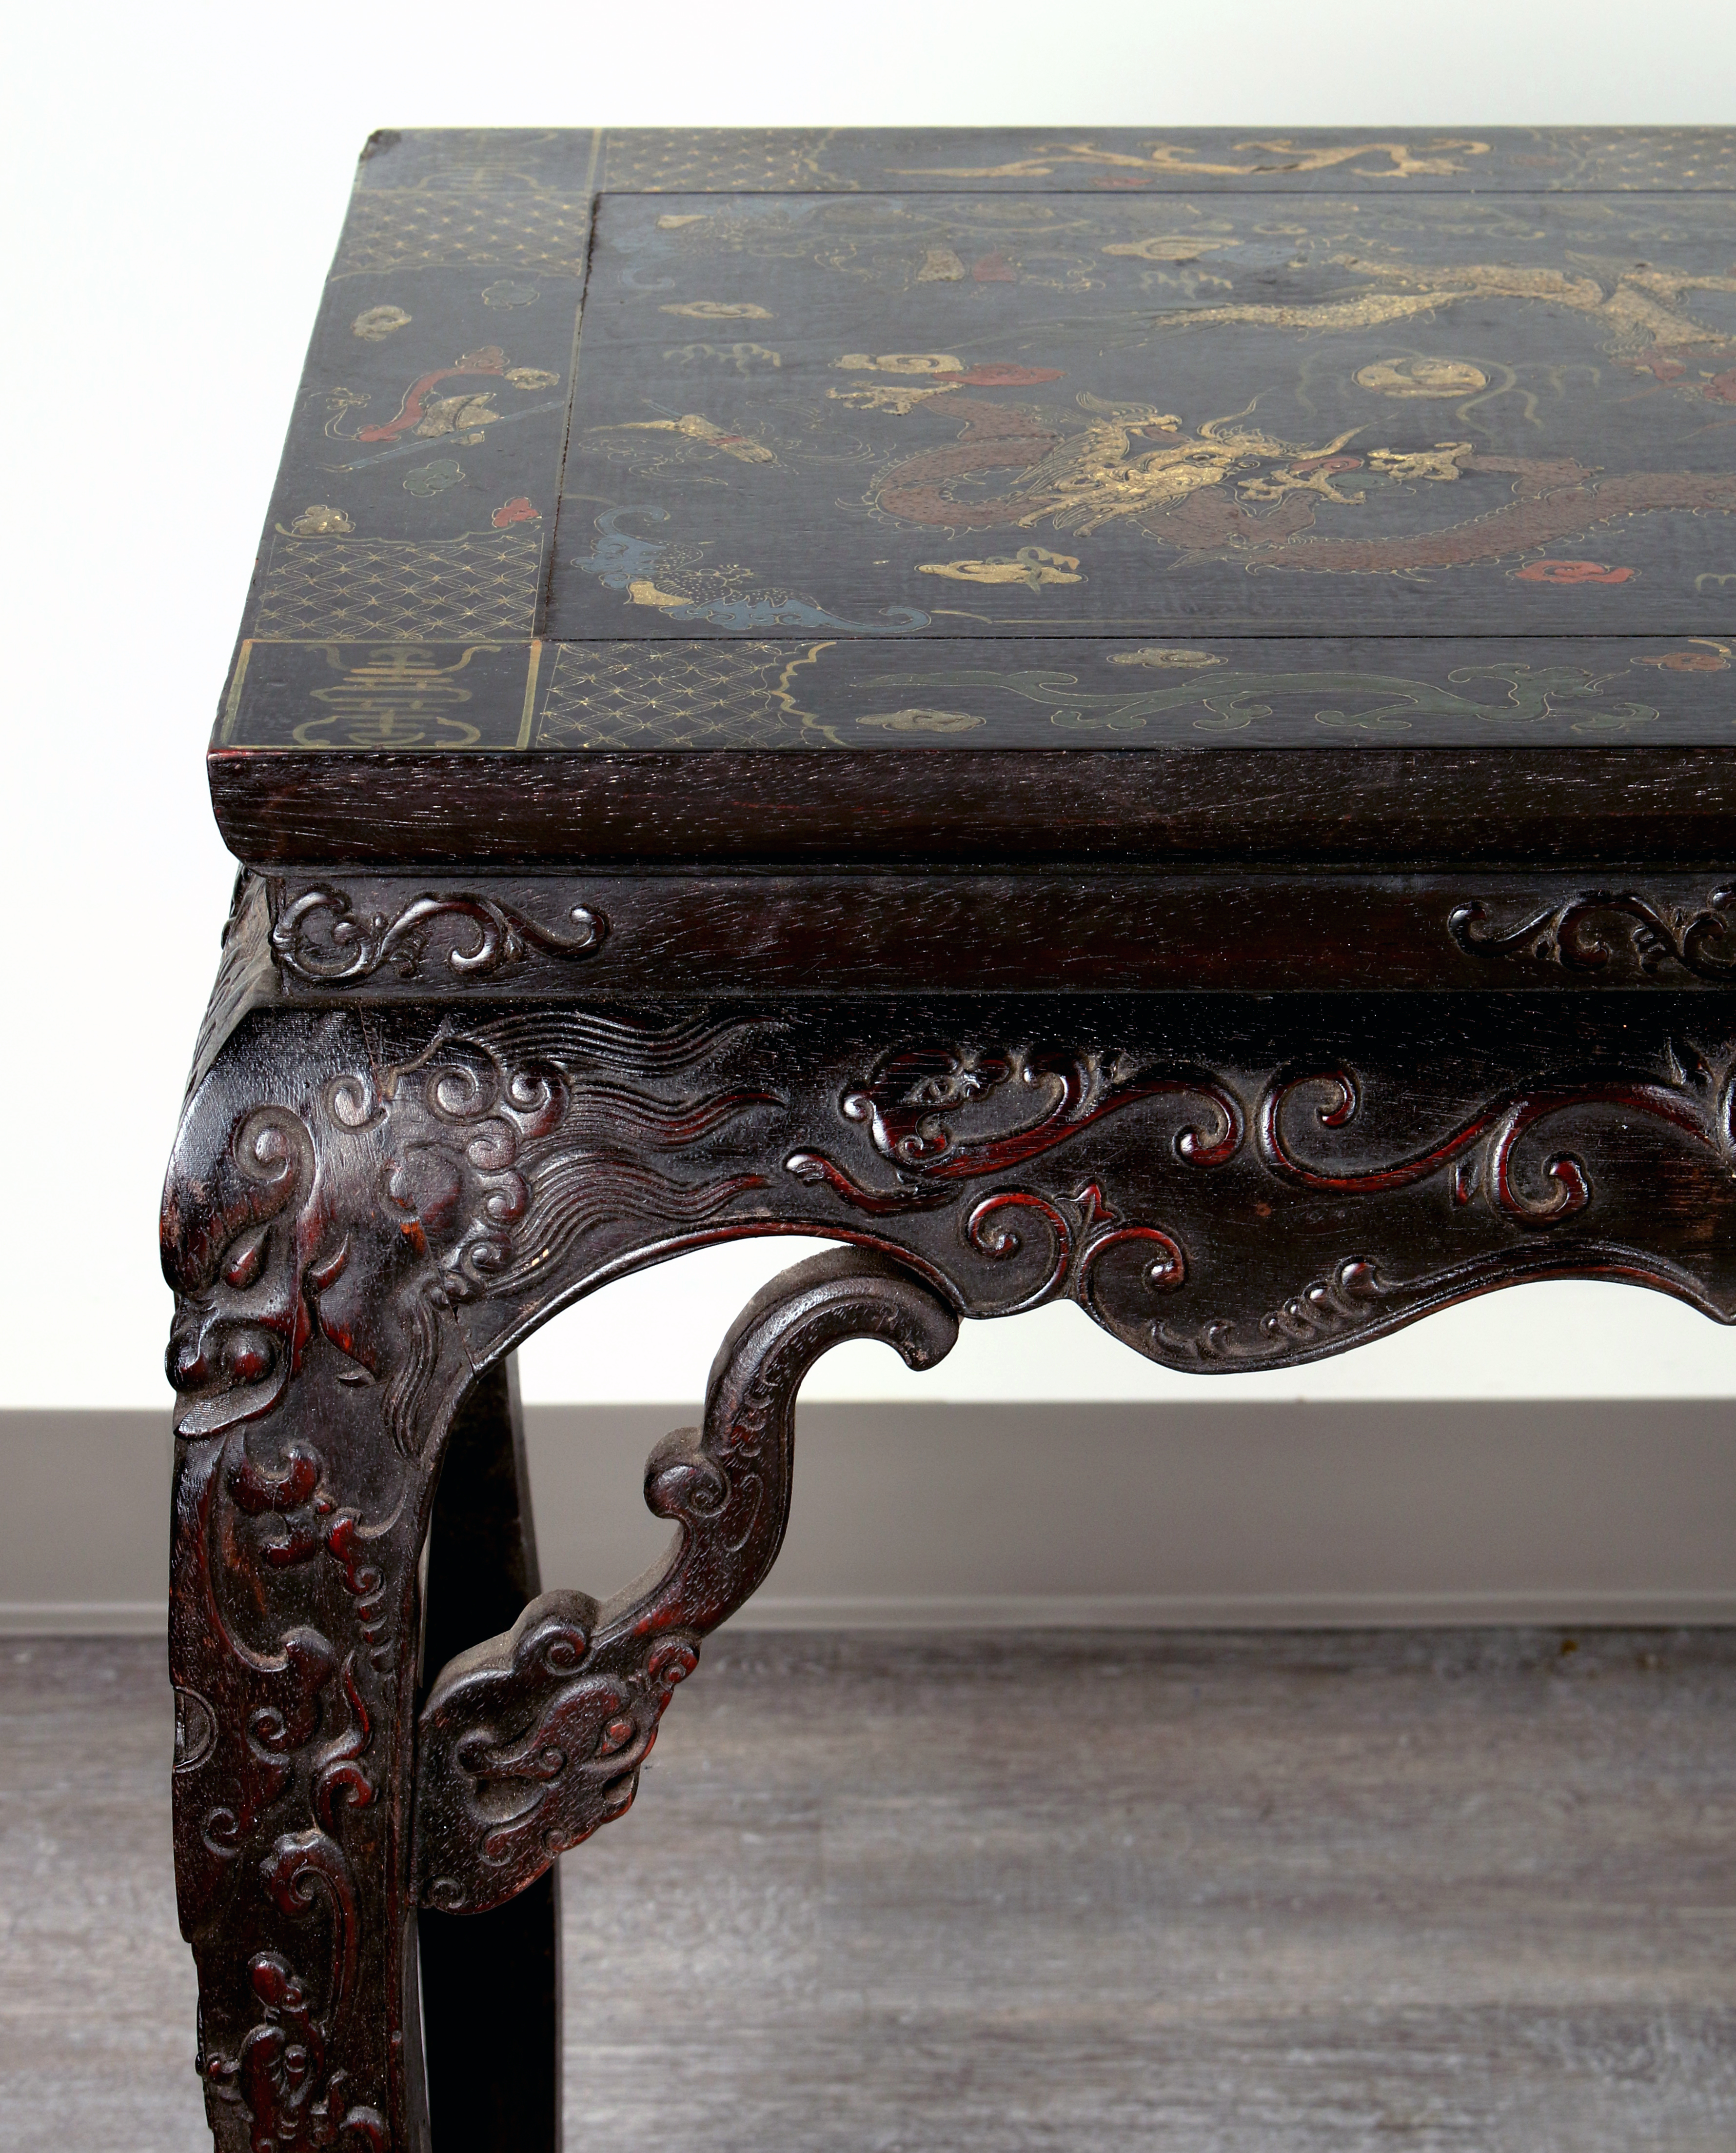 Vibrant Chinese Lacquer Table With Dragon Painting & Scholar Motifs image 4